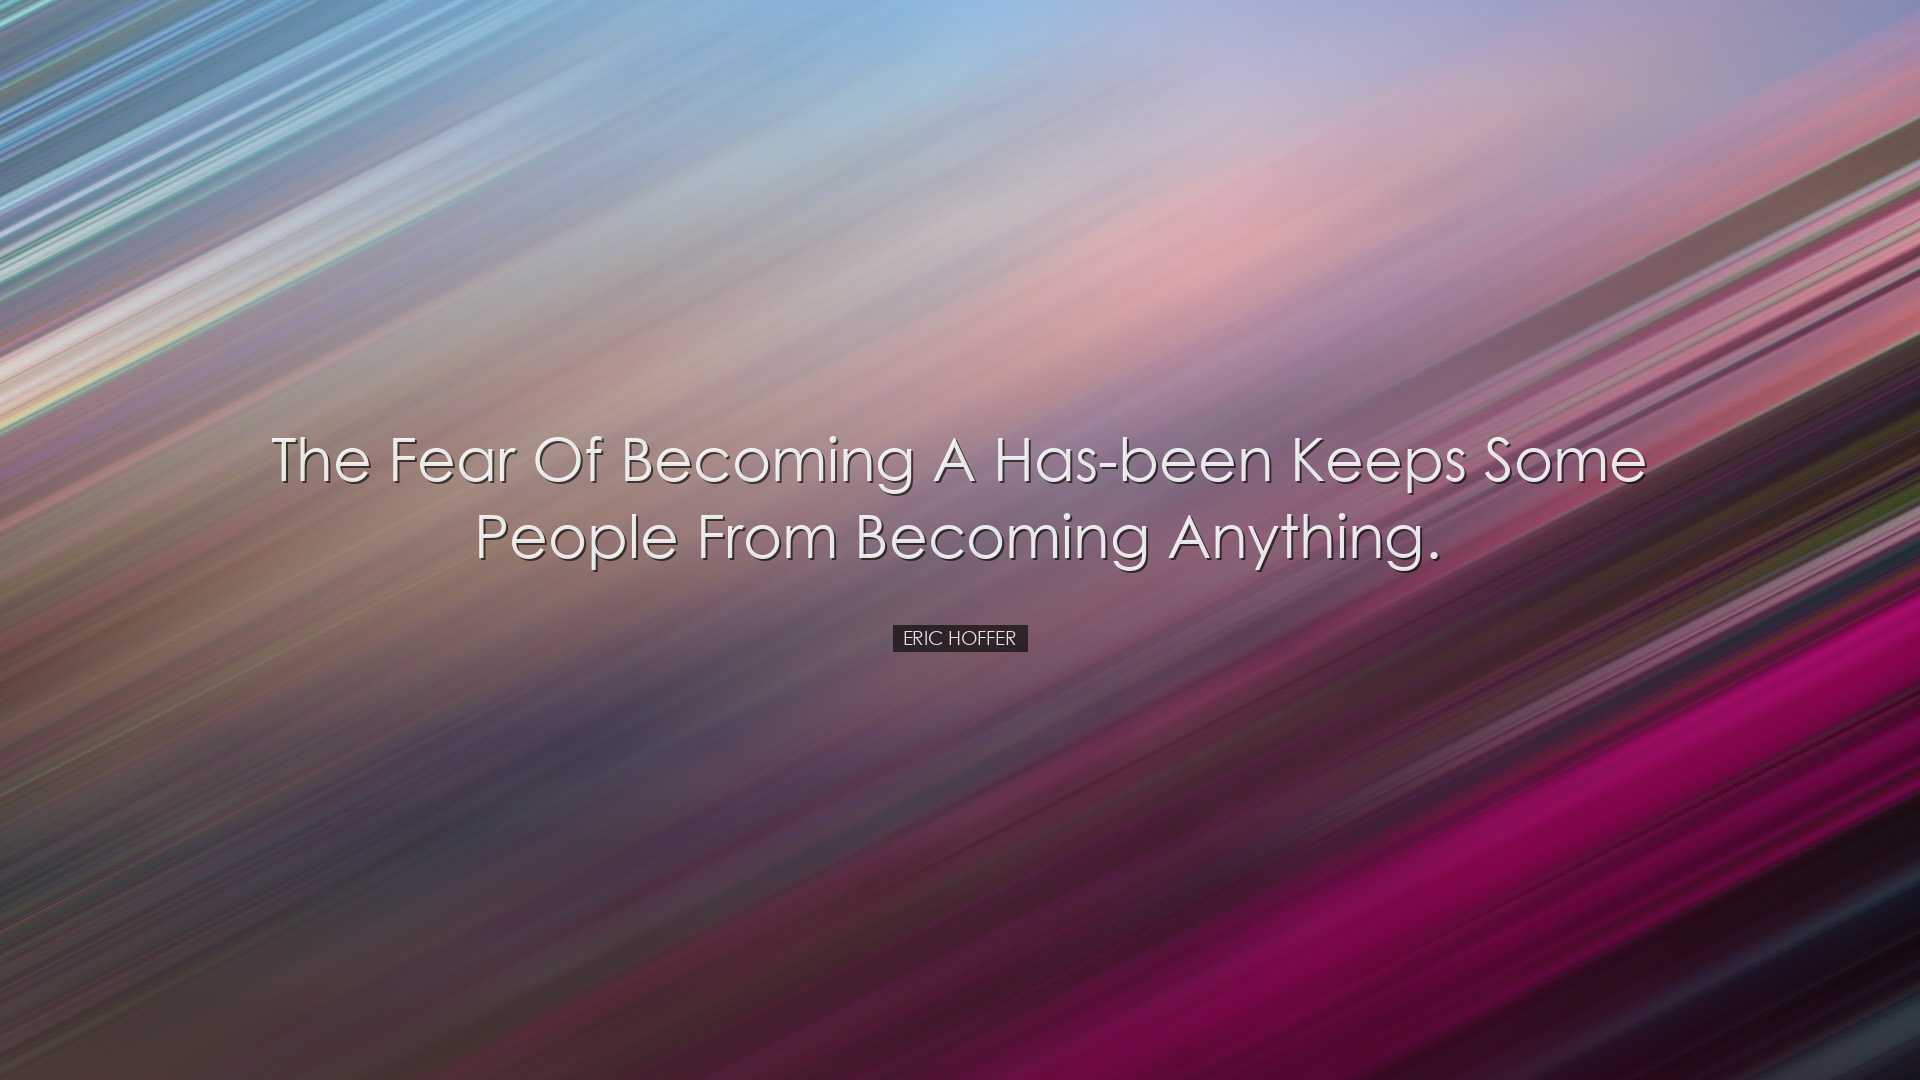 The fear of becoming a has-been keeps some people from becoming an